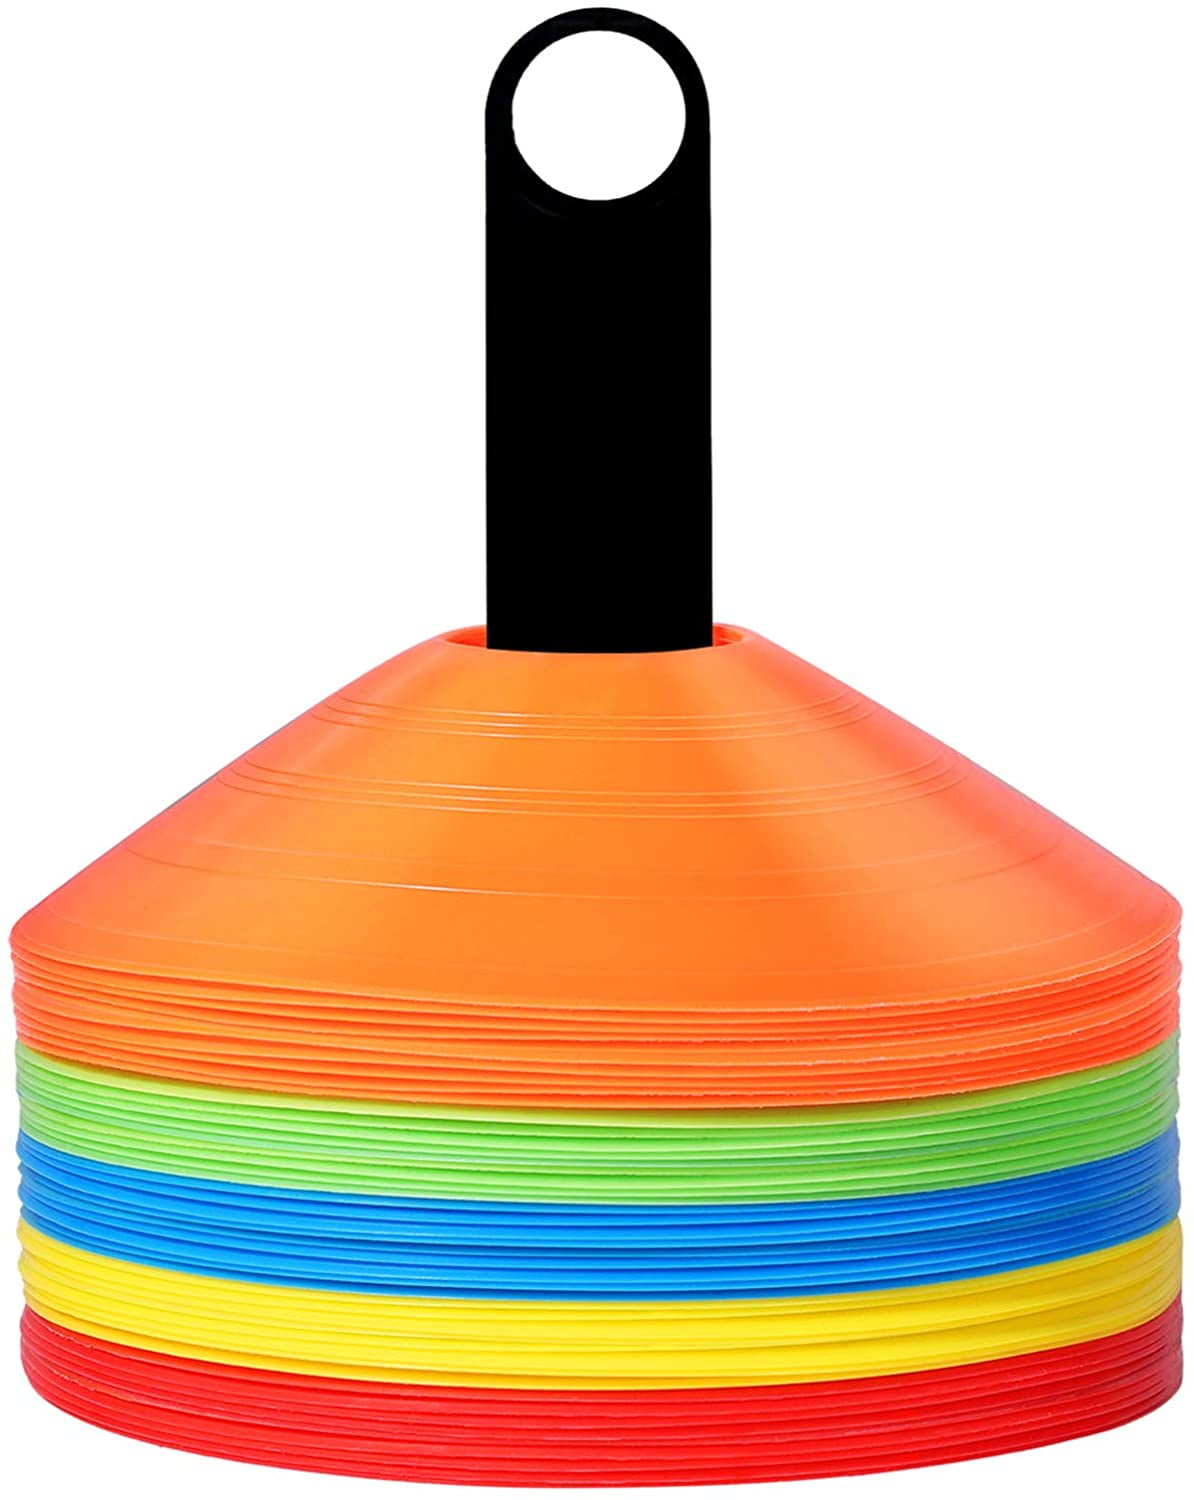 Football & Any Ball Game to Mark,Disc Mini Training Cones,Field Markers Includes Storage Bag. 30 Pack Premium Soccer/Football Agility Cones Marke Cones,Perfect for Soccer 30 Pack 